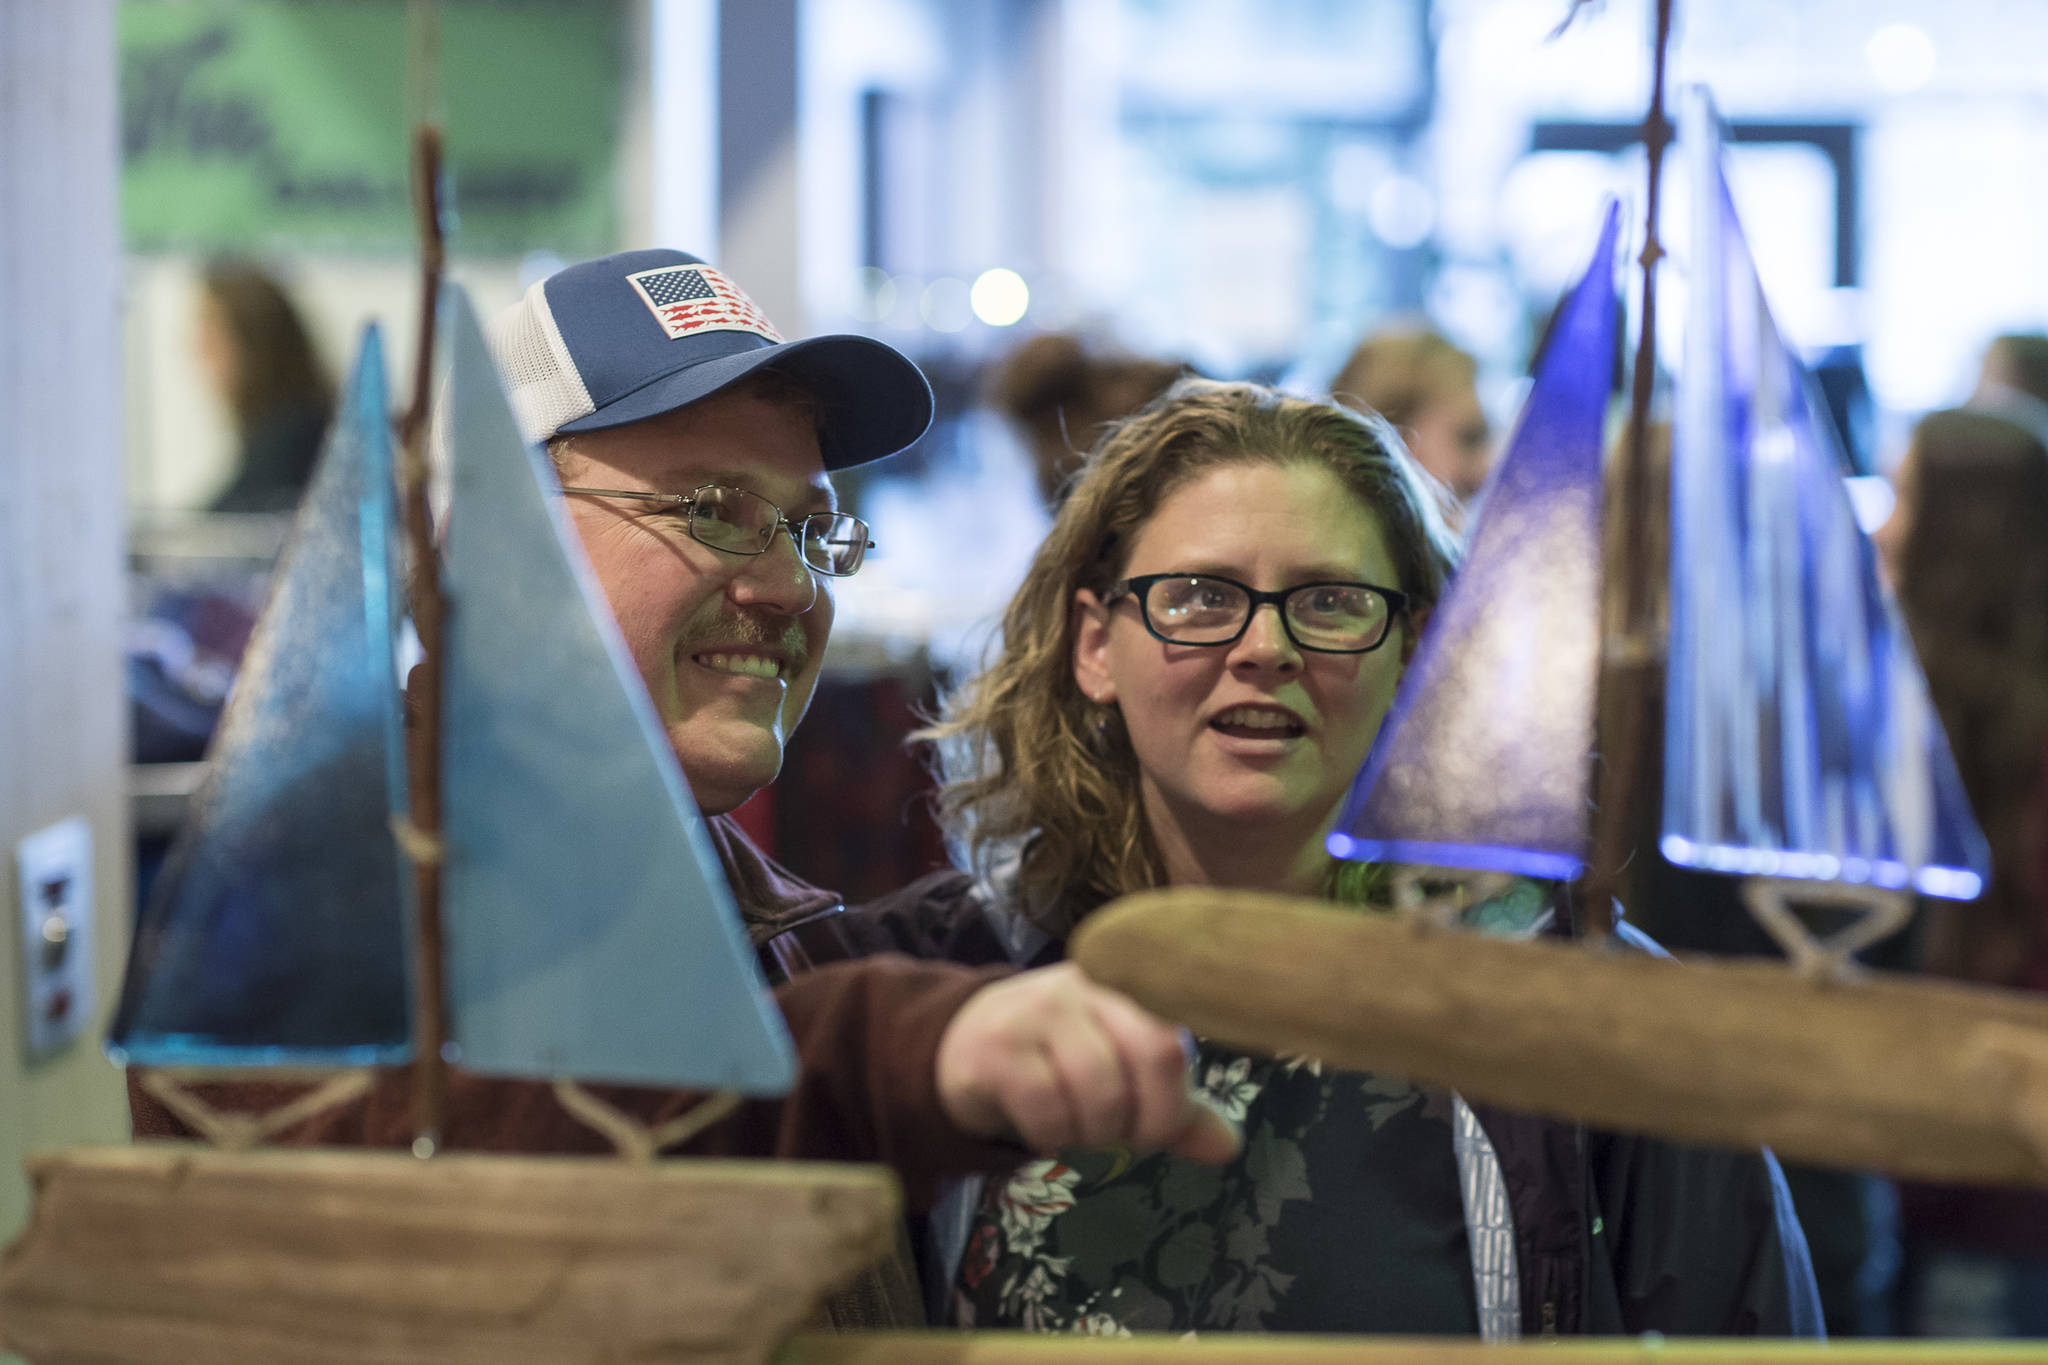 Tyler and Sarah Eddy, of Sitka, admire sailboats on display by Darcie Henderson of Sea Glass Designs at the Public Market in Centennial Hall on Friday, Nov. 23, 2018. (Michael Penn | Juneau Empire)